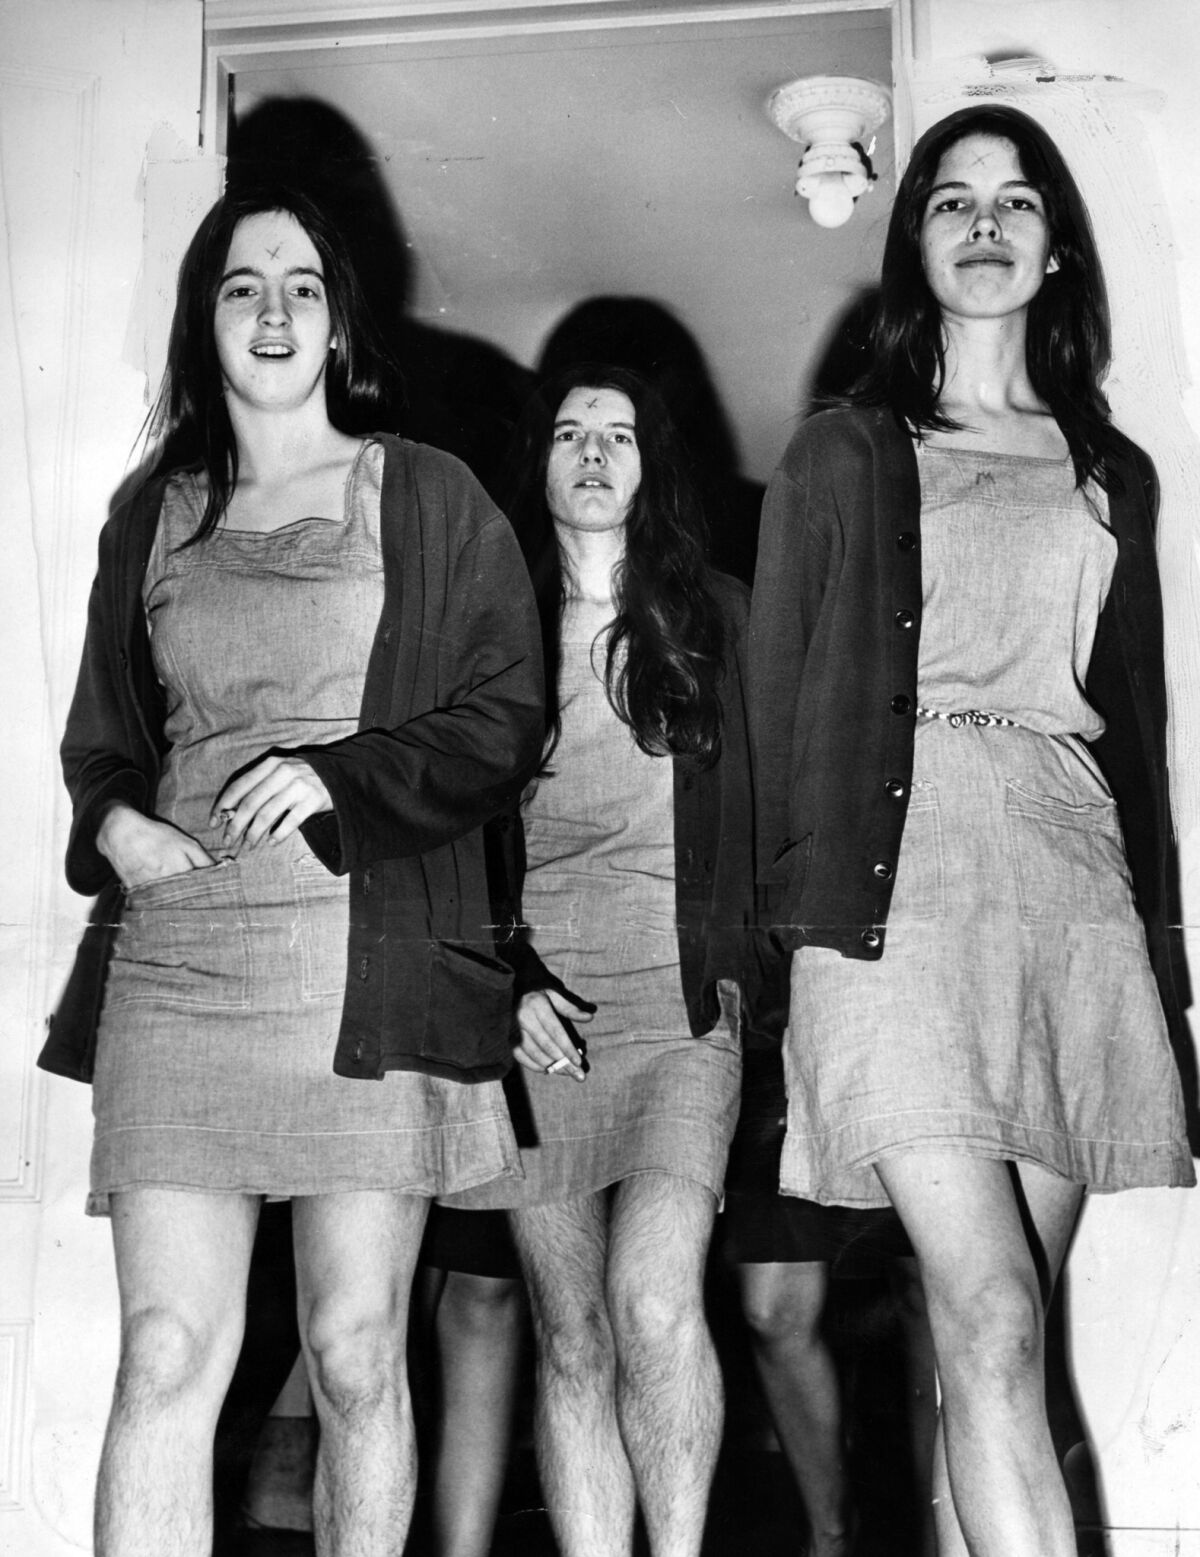 From left, Manson followers Susan Atkins, Patricia Krenwinkel and Leslie Van Houten walk into a morning court session in 1970. When Manson carved an "X" into his forehead during the trial, his "family" members followed suit. ( Los Angeles Times)